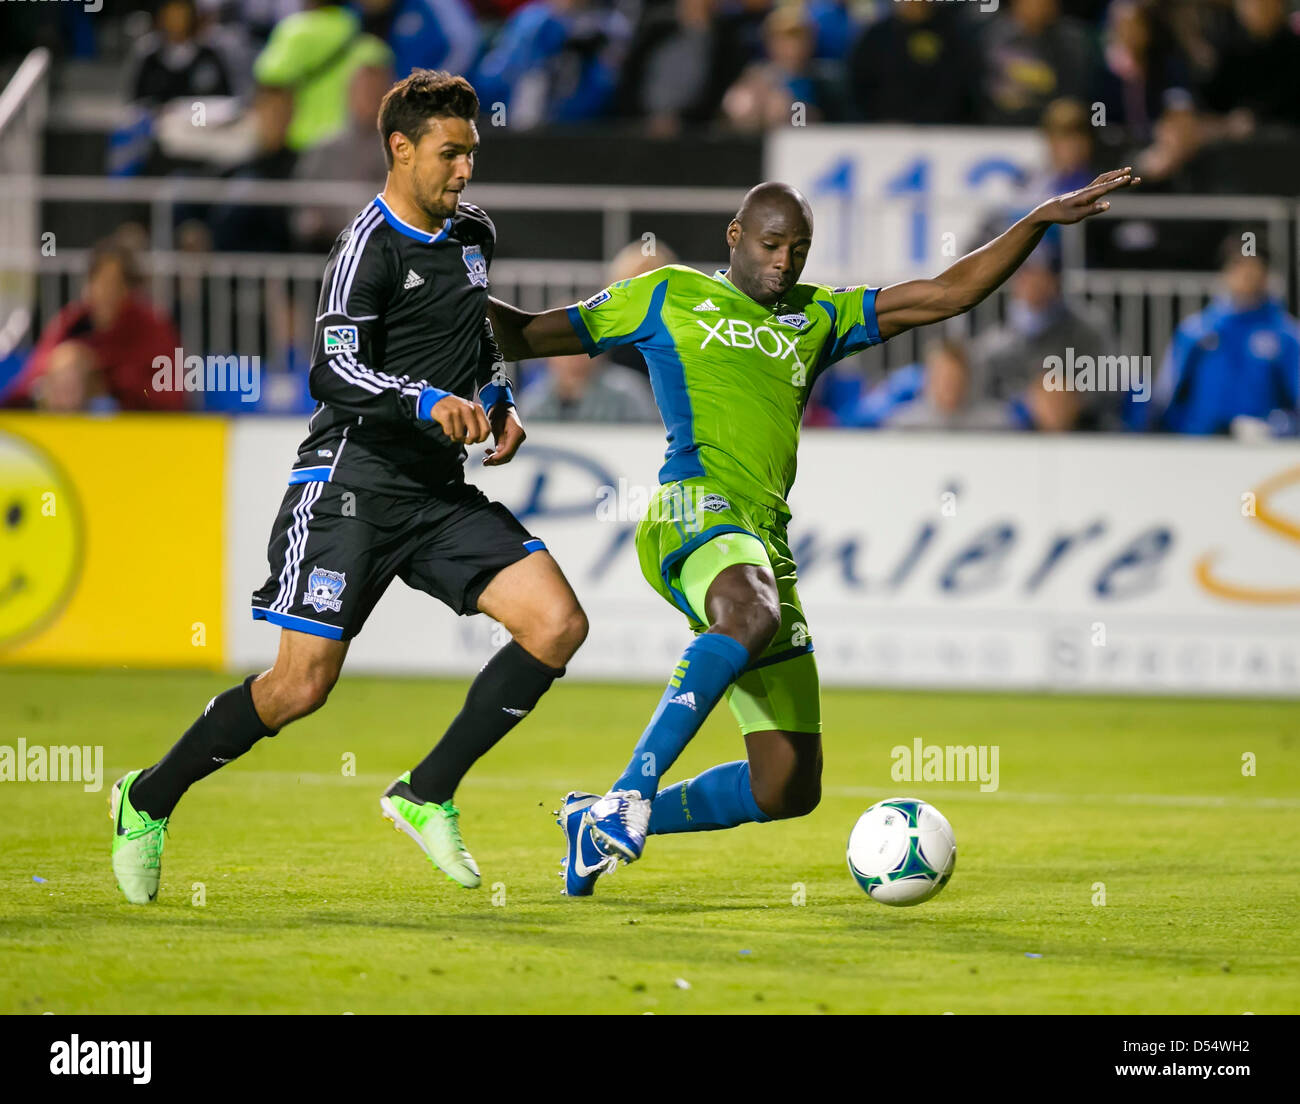 Santa Clara, California, USA. 23rd March 2013. Seattle Sounders defender Djimi Traore (19) takes the ball from San Jose Earthquakes forward Chris Wondolowski (8) during the the MLS game between the Seattle Sounders and the San Jose Earthquakes at Buck Shaw Stadium in Santa Clara CA. San Jose defeated Seattle 1-0. Credit:  Cal Sport Media / Alamy Live News Stock Photo